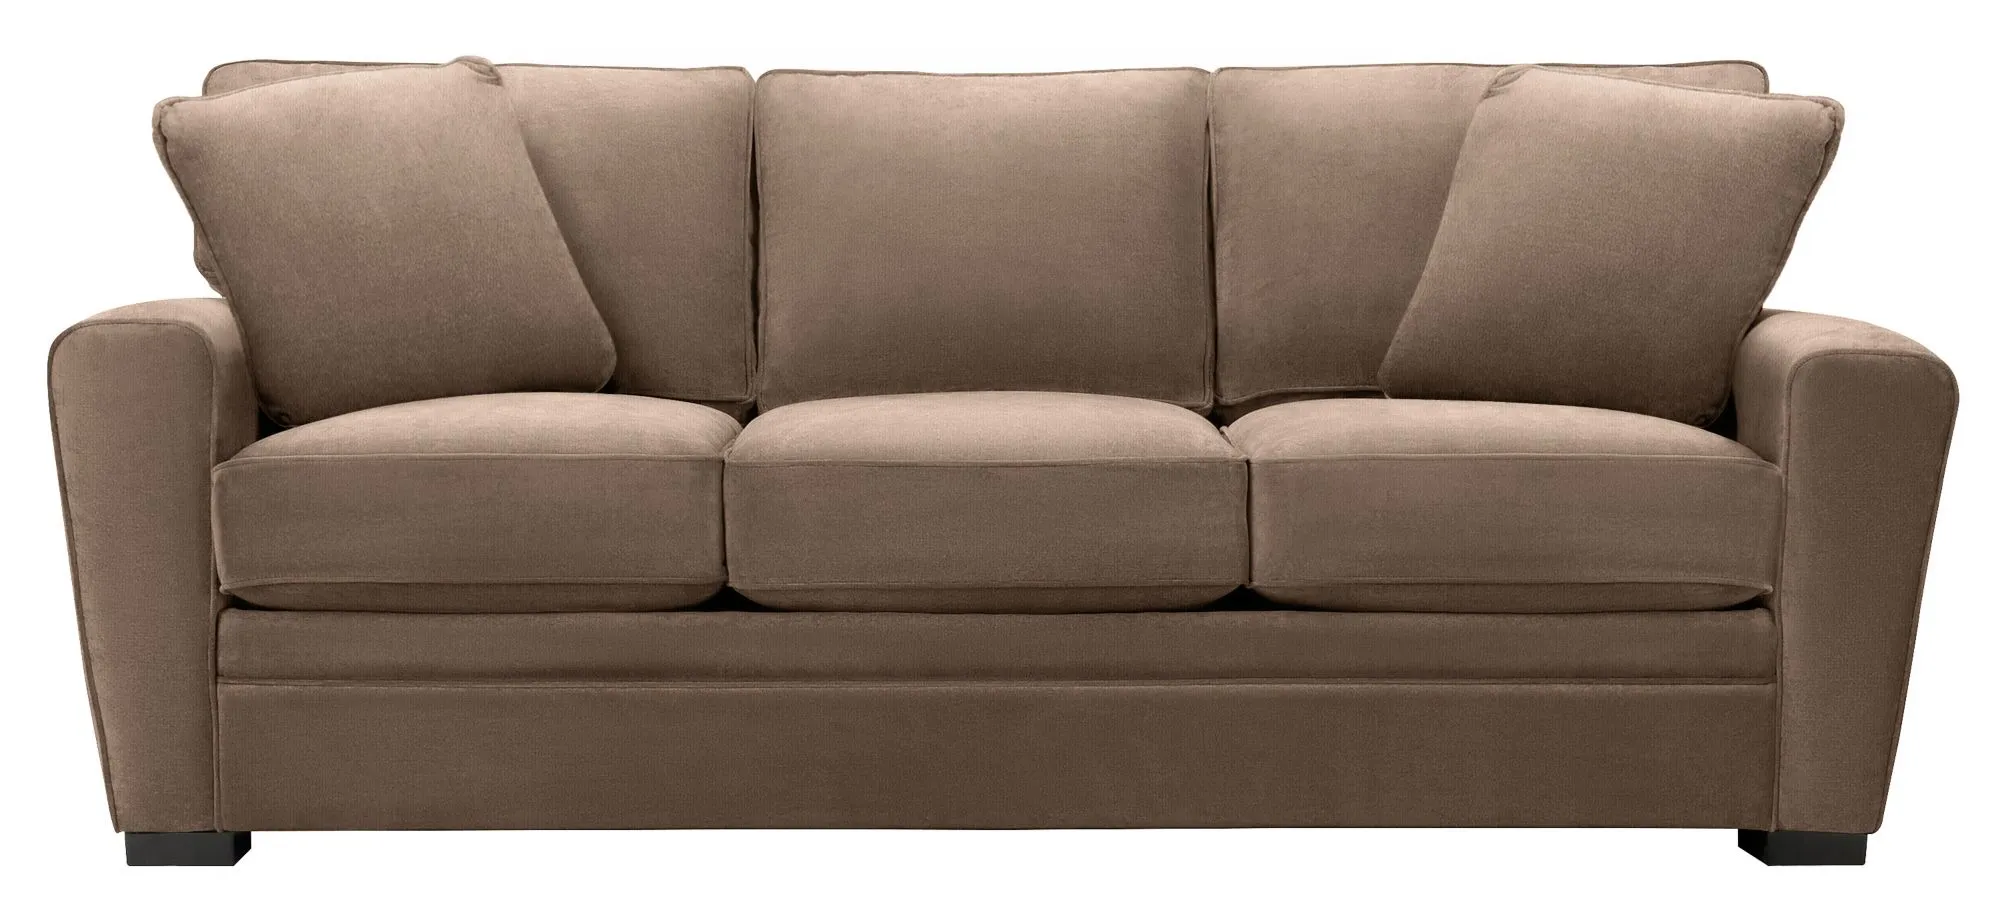 Artemis II Sofa in Gypsy Taupe by Jonathan Louis